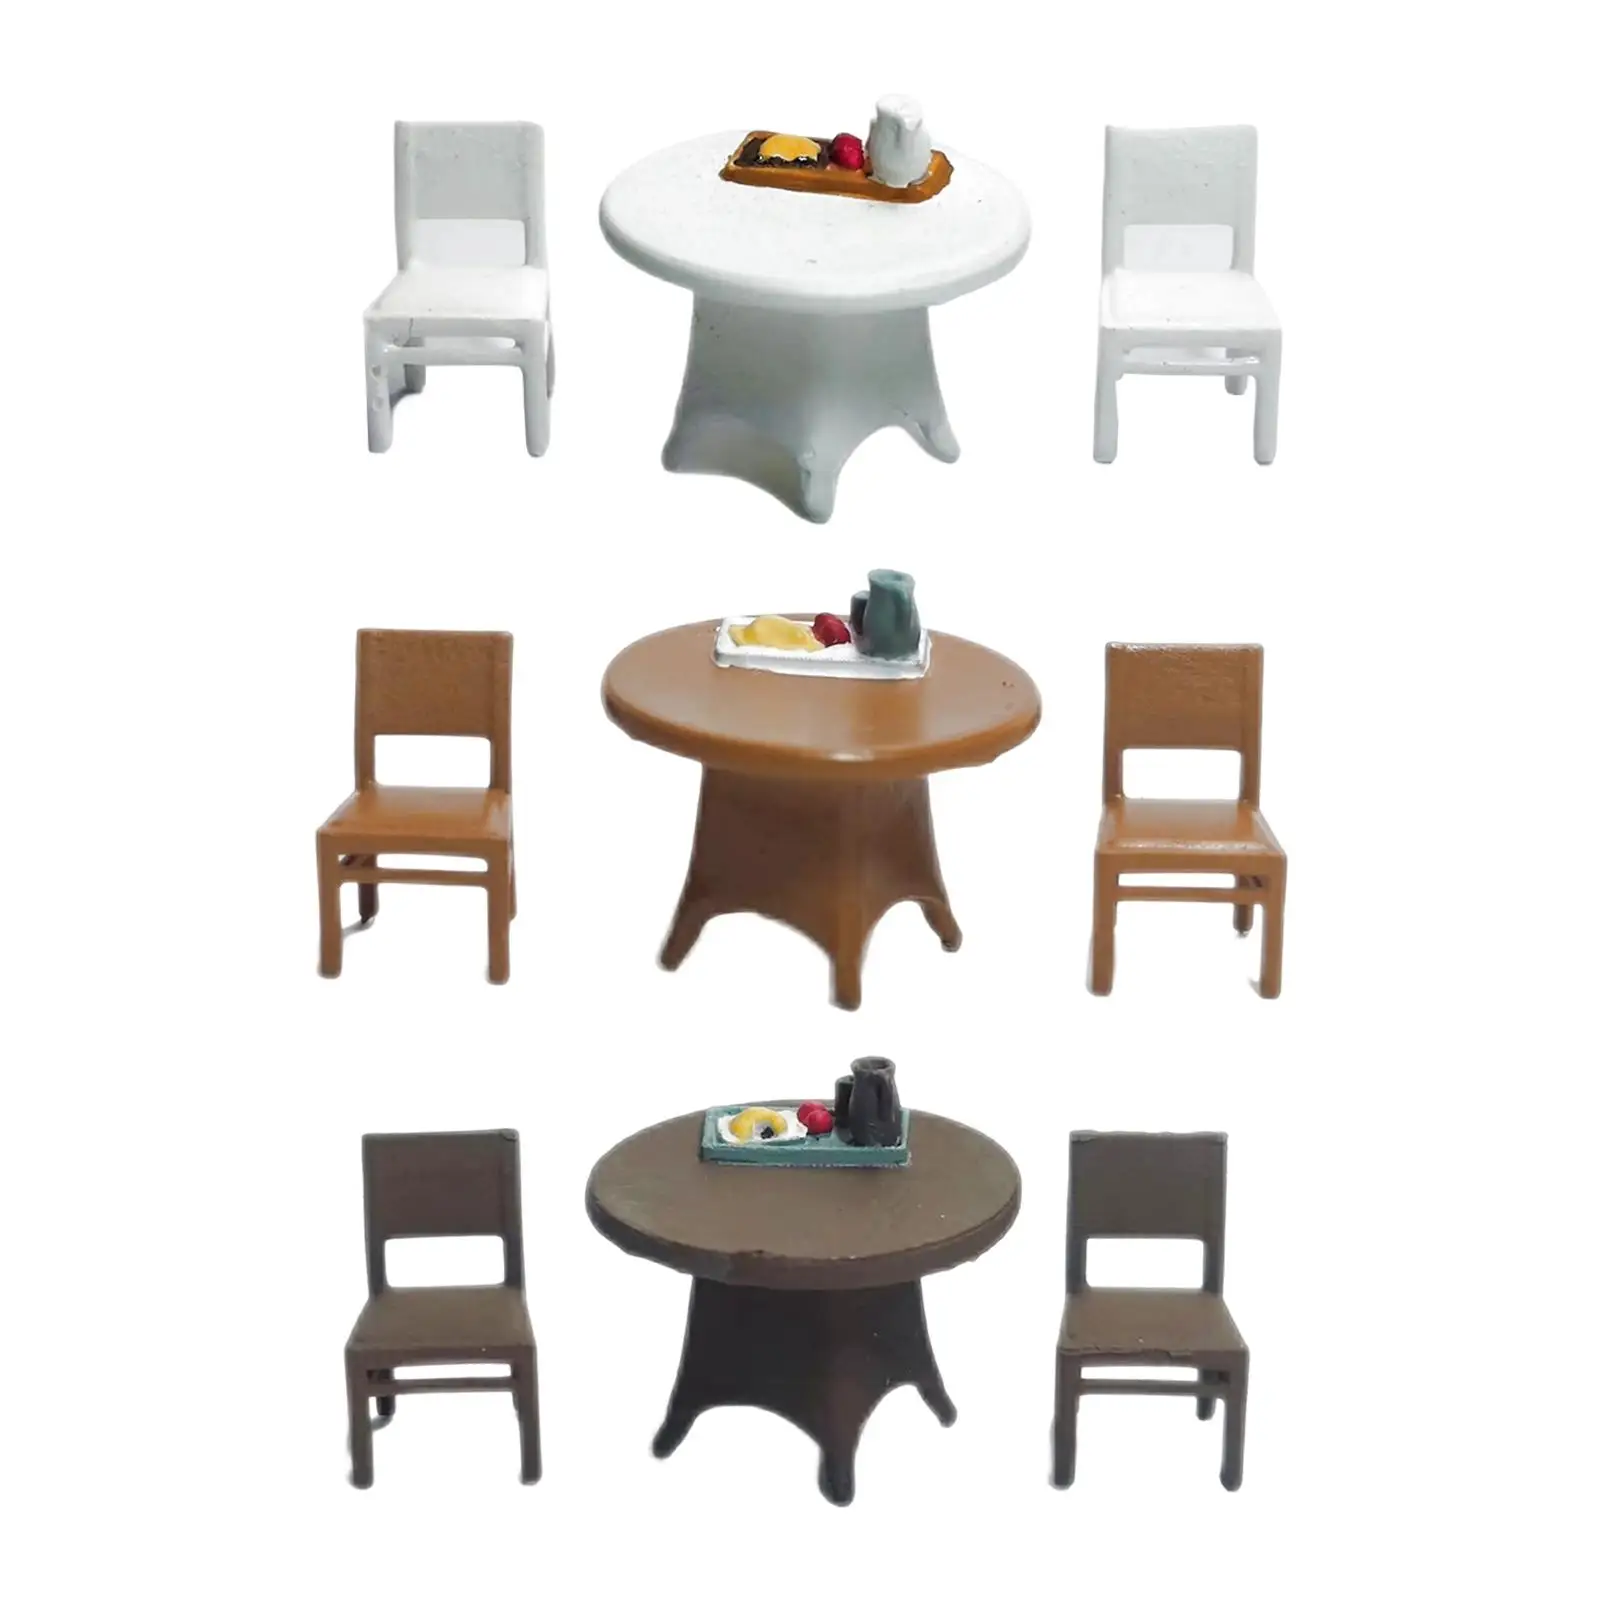 3x Hand Painted 1/64 Table and Chair Model Layout Decoration Beach Scenery